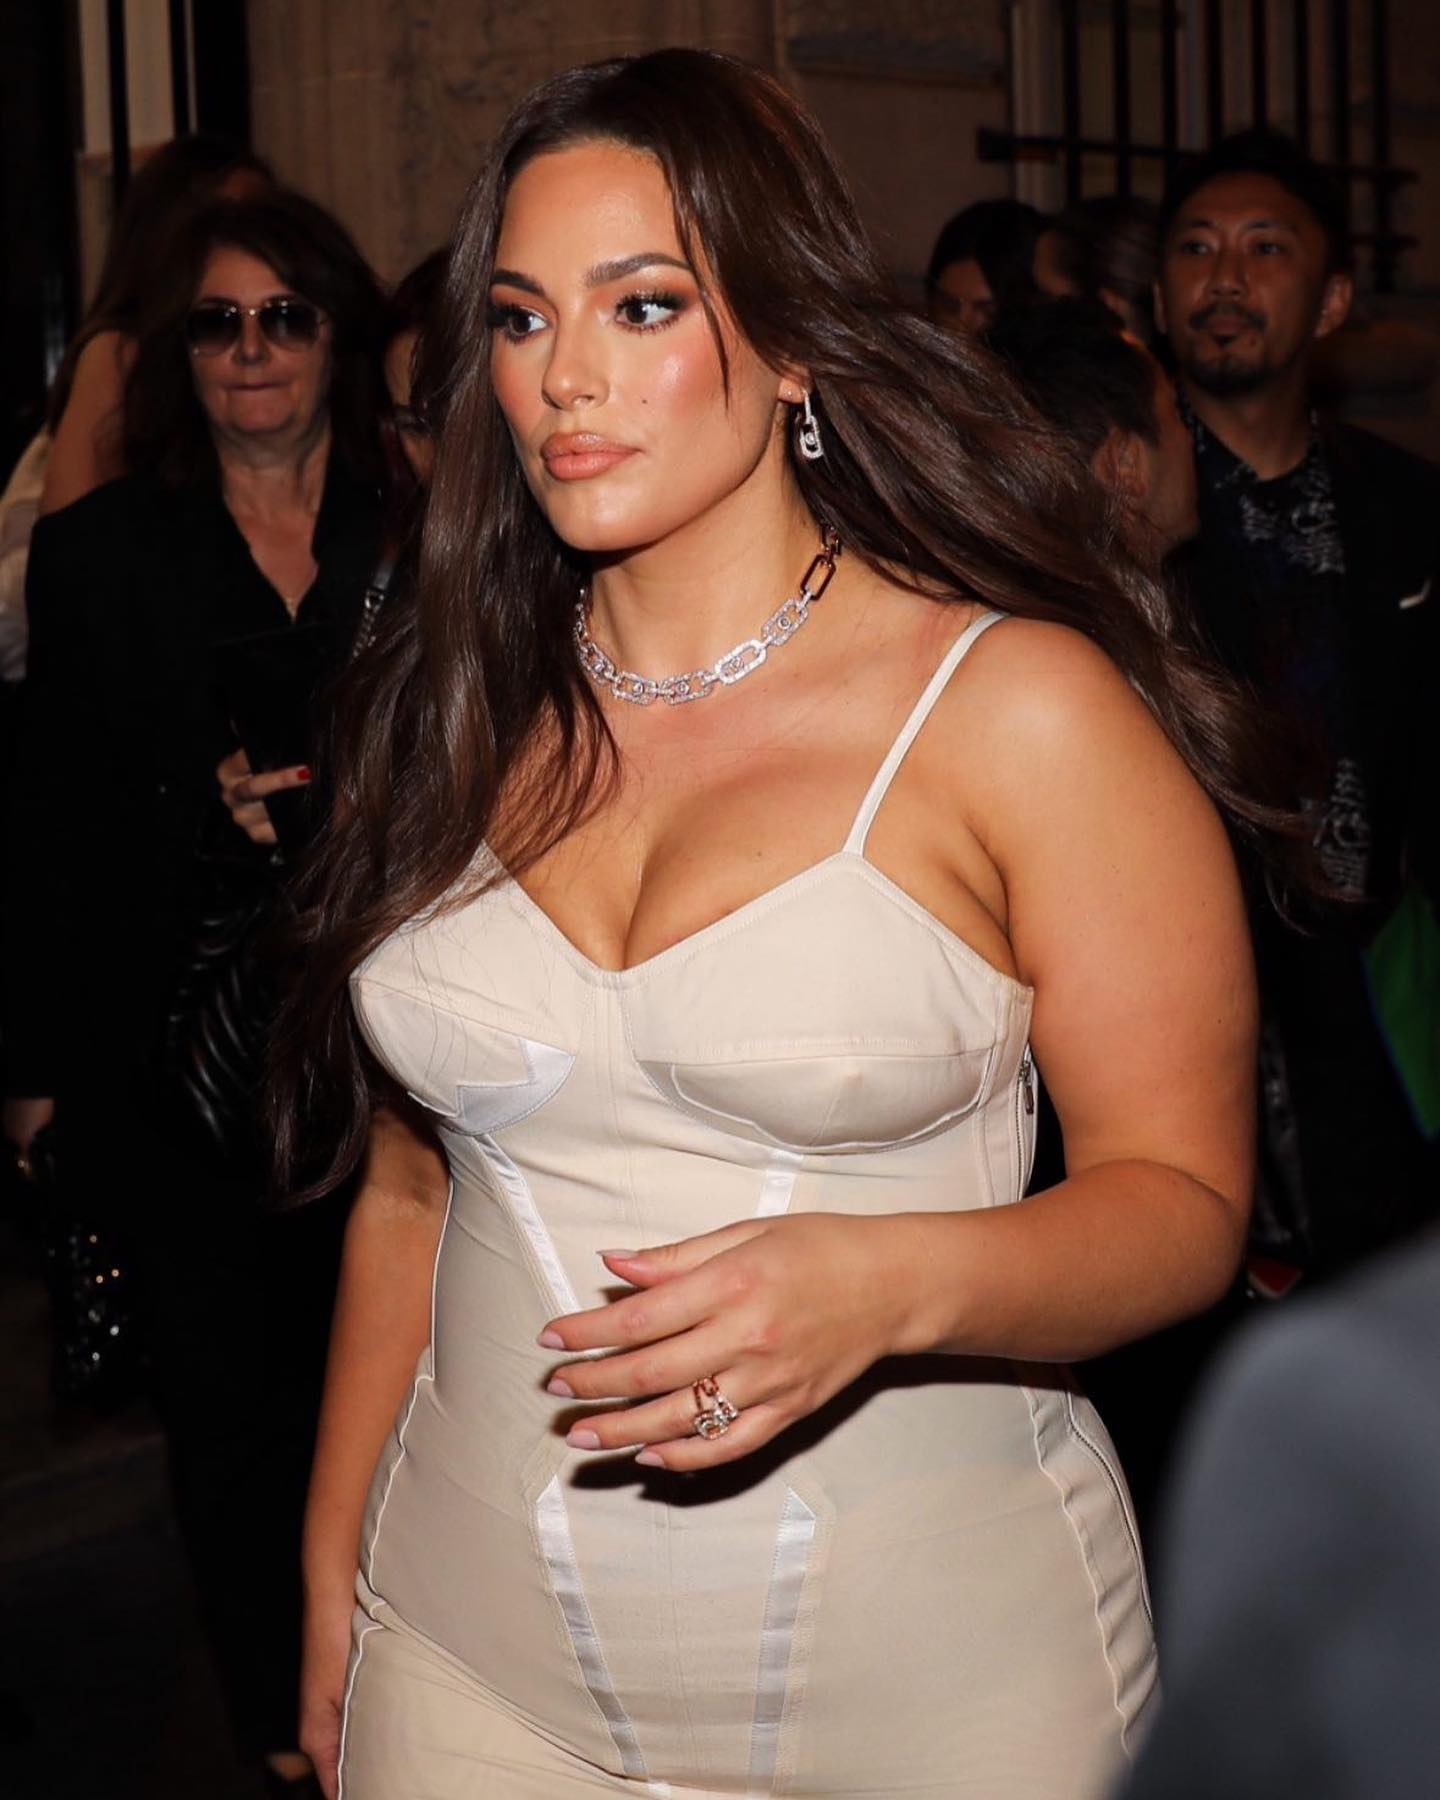 You are currently viewing Ashley Graham Bra Size and Body Measurements